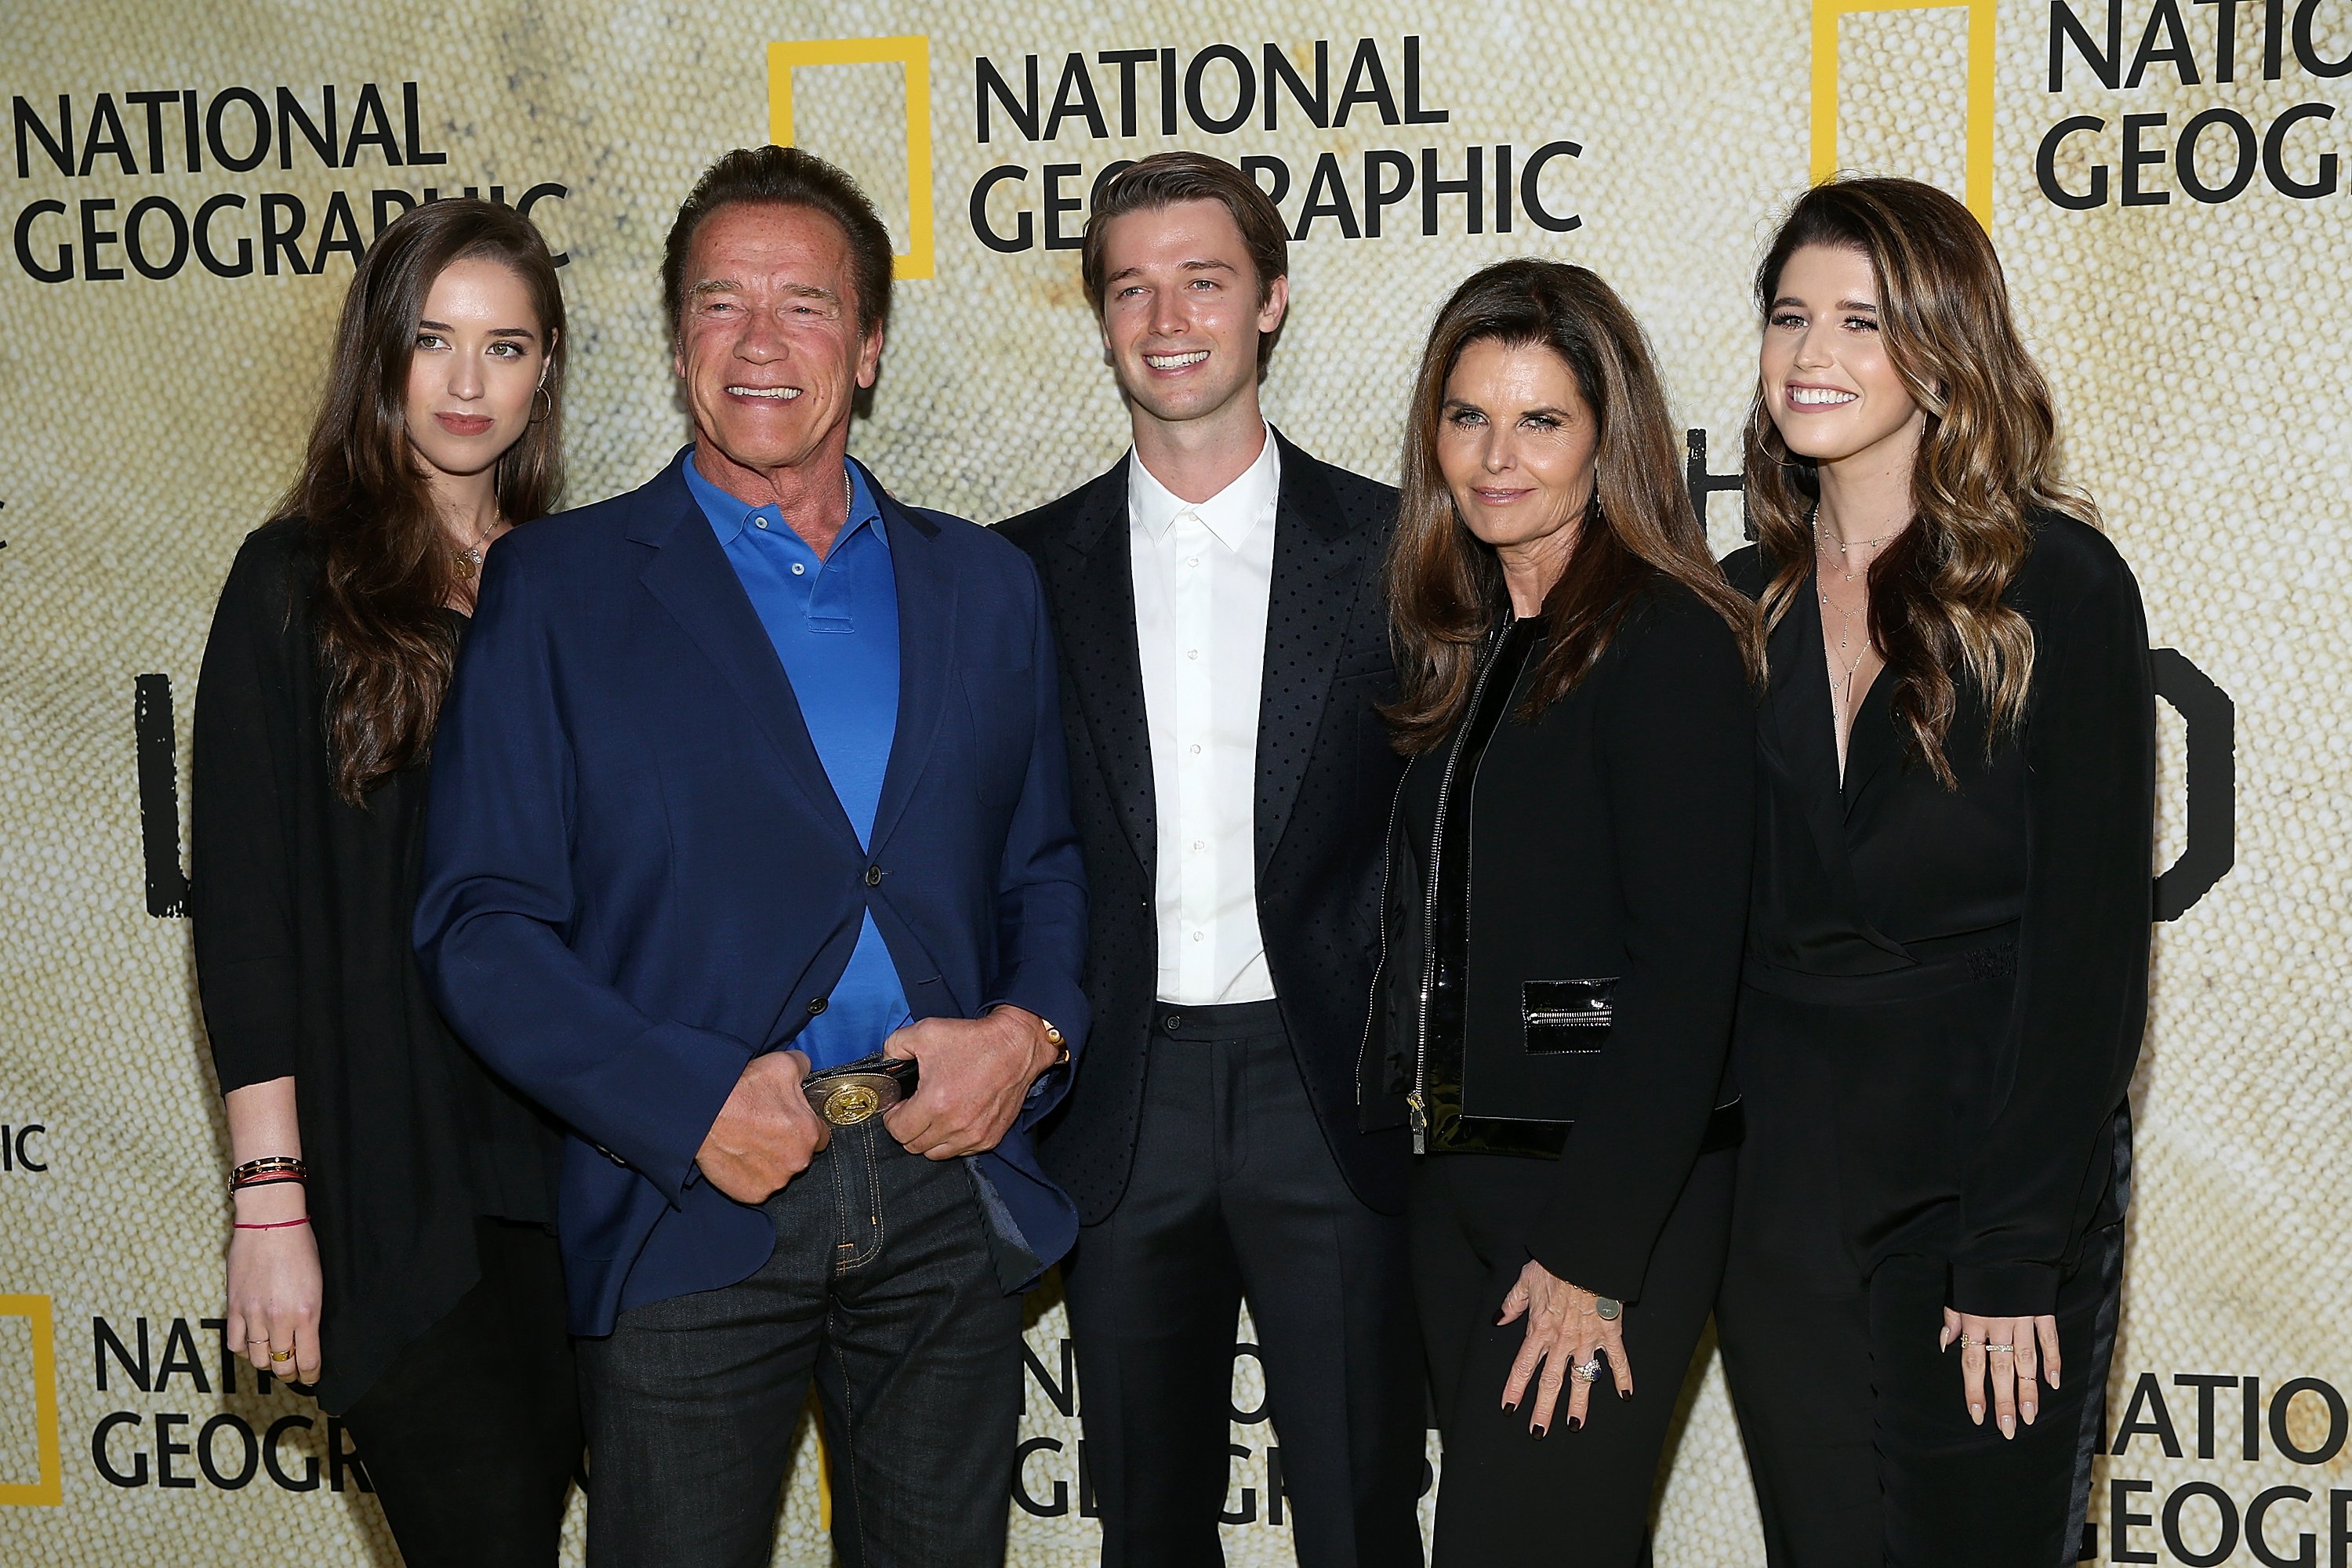 Christina Schwarzenegger, Arnold Schwarzenegger, Patrick Schwarzenegger, Maria Shriver, and Katherine Schwarzenegger at the "The Long Road Home" premiere at Royce Hall in Los Angeles, CA, on October 30, 2017. | Source: Getty Images